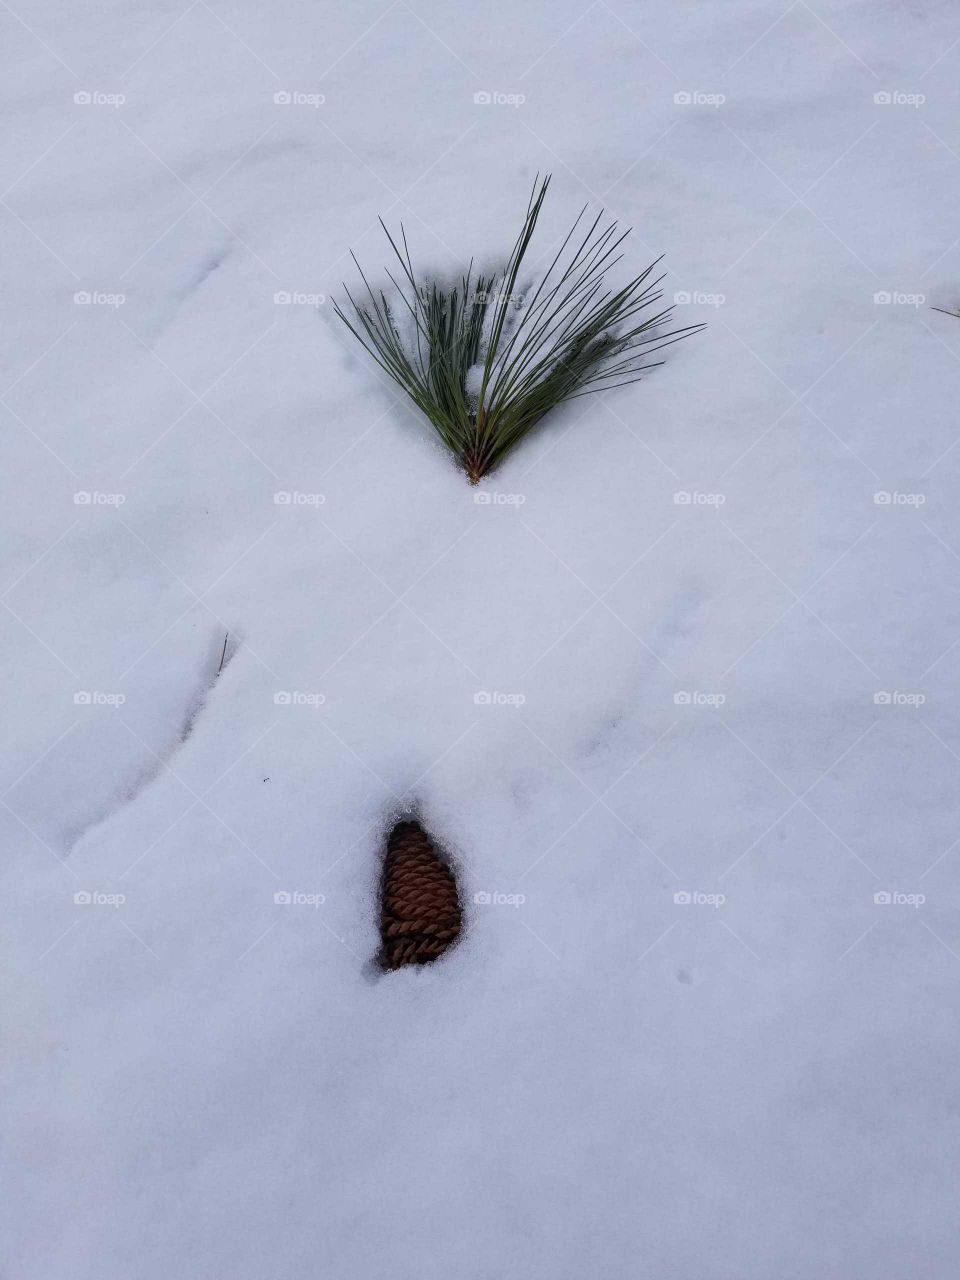 pine cone, snow, pine cone in the snow, winter, pine needles, evergreen in the snow